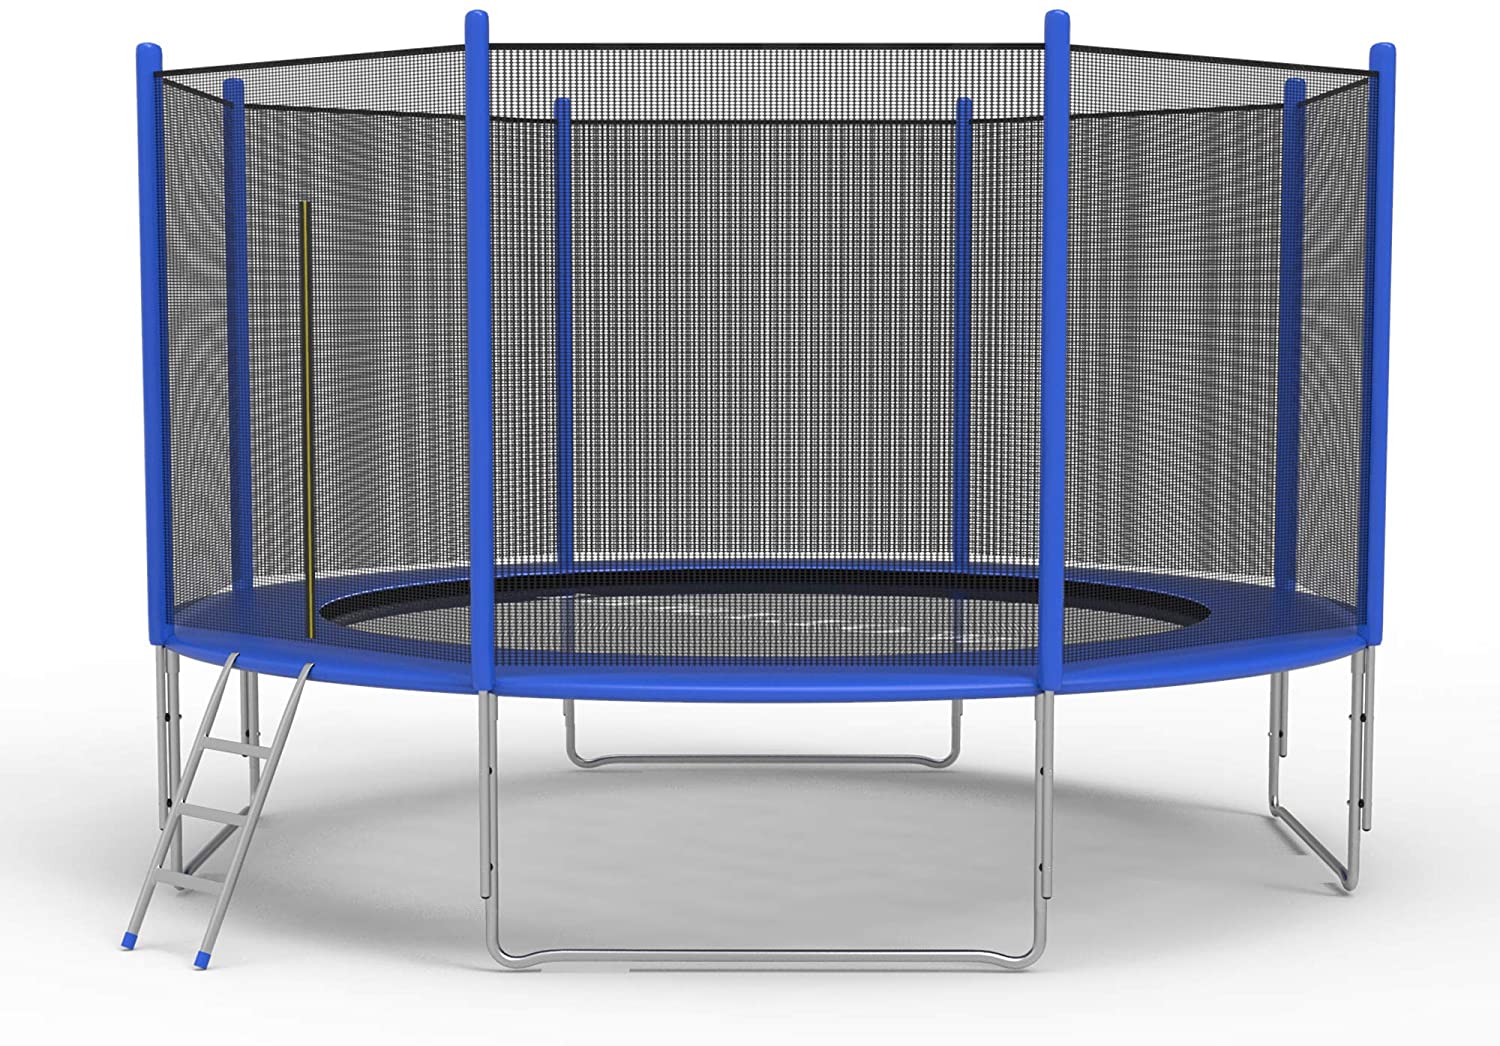 Trampoline for Kids and Family - 10 FT Recreational Trampoline with Safety Enclosure Net and Ladder and Spring Cover - Outdoor Backyard Bounce Jump Have Fun